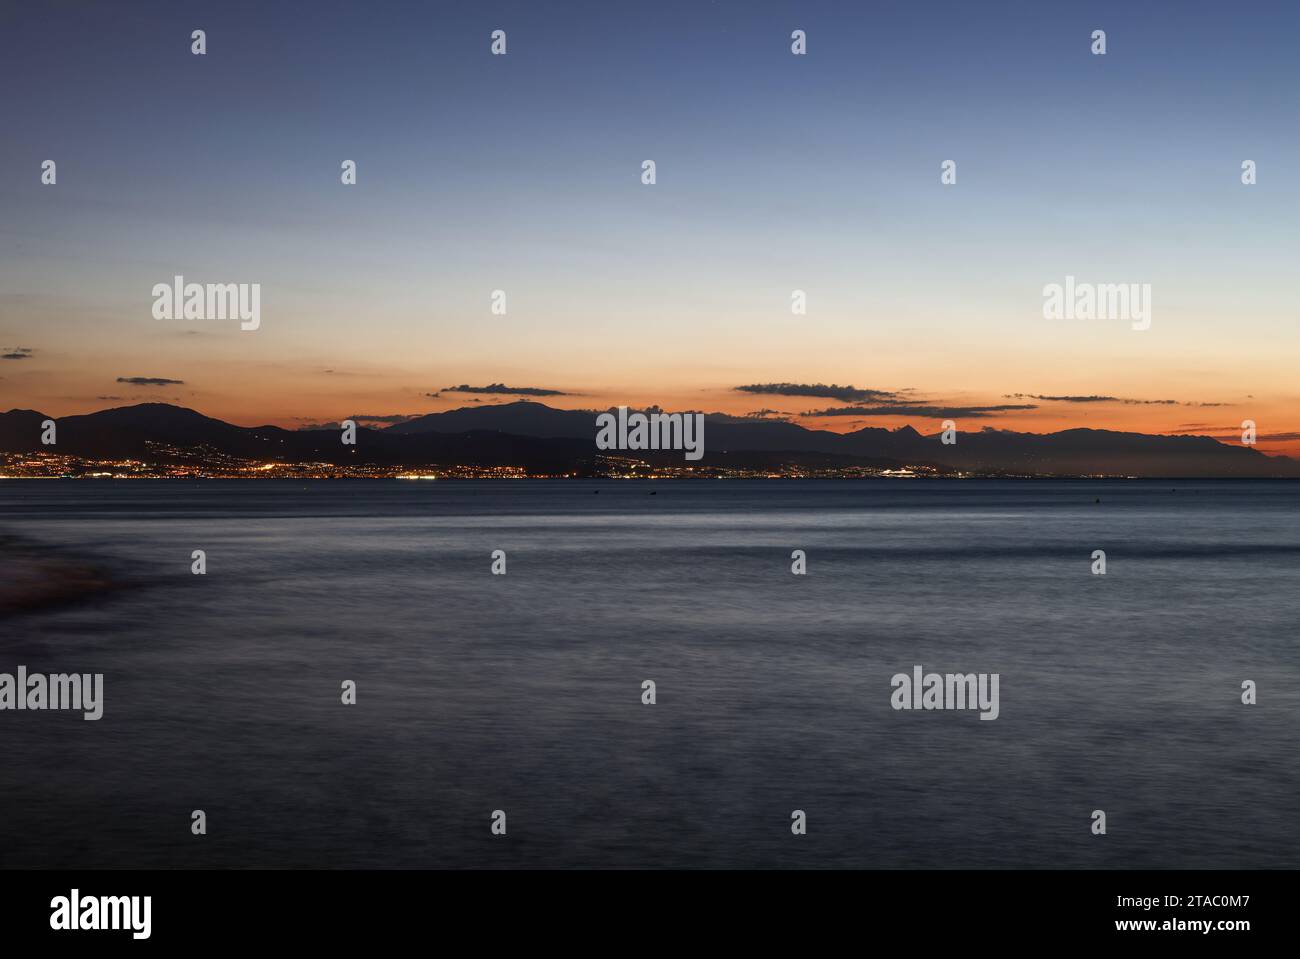 View from Torremolinos towards Malaga just before sunrise. Costa del Sol, Spain. Stock Photo